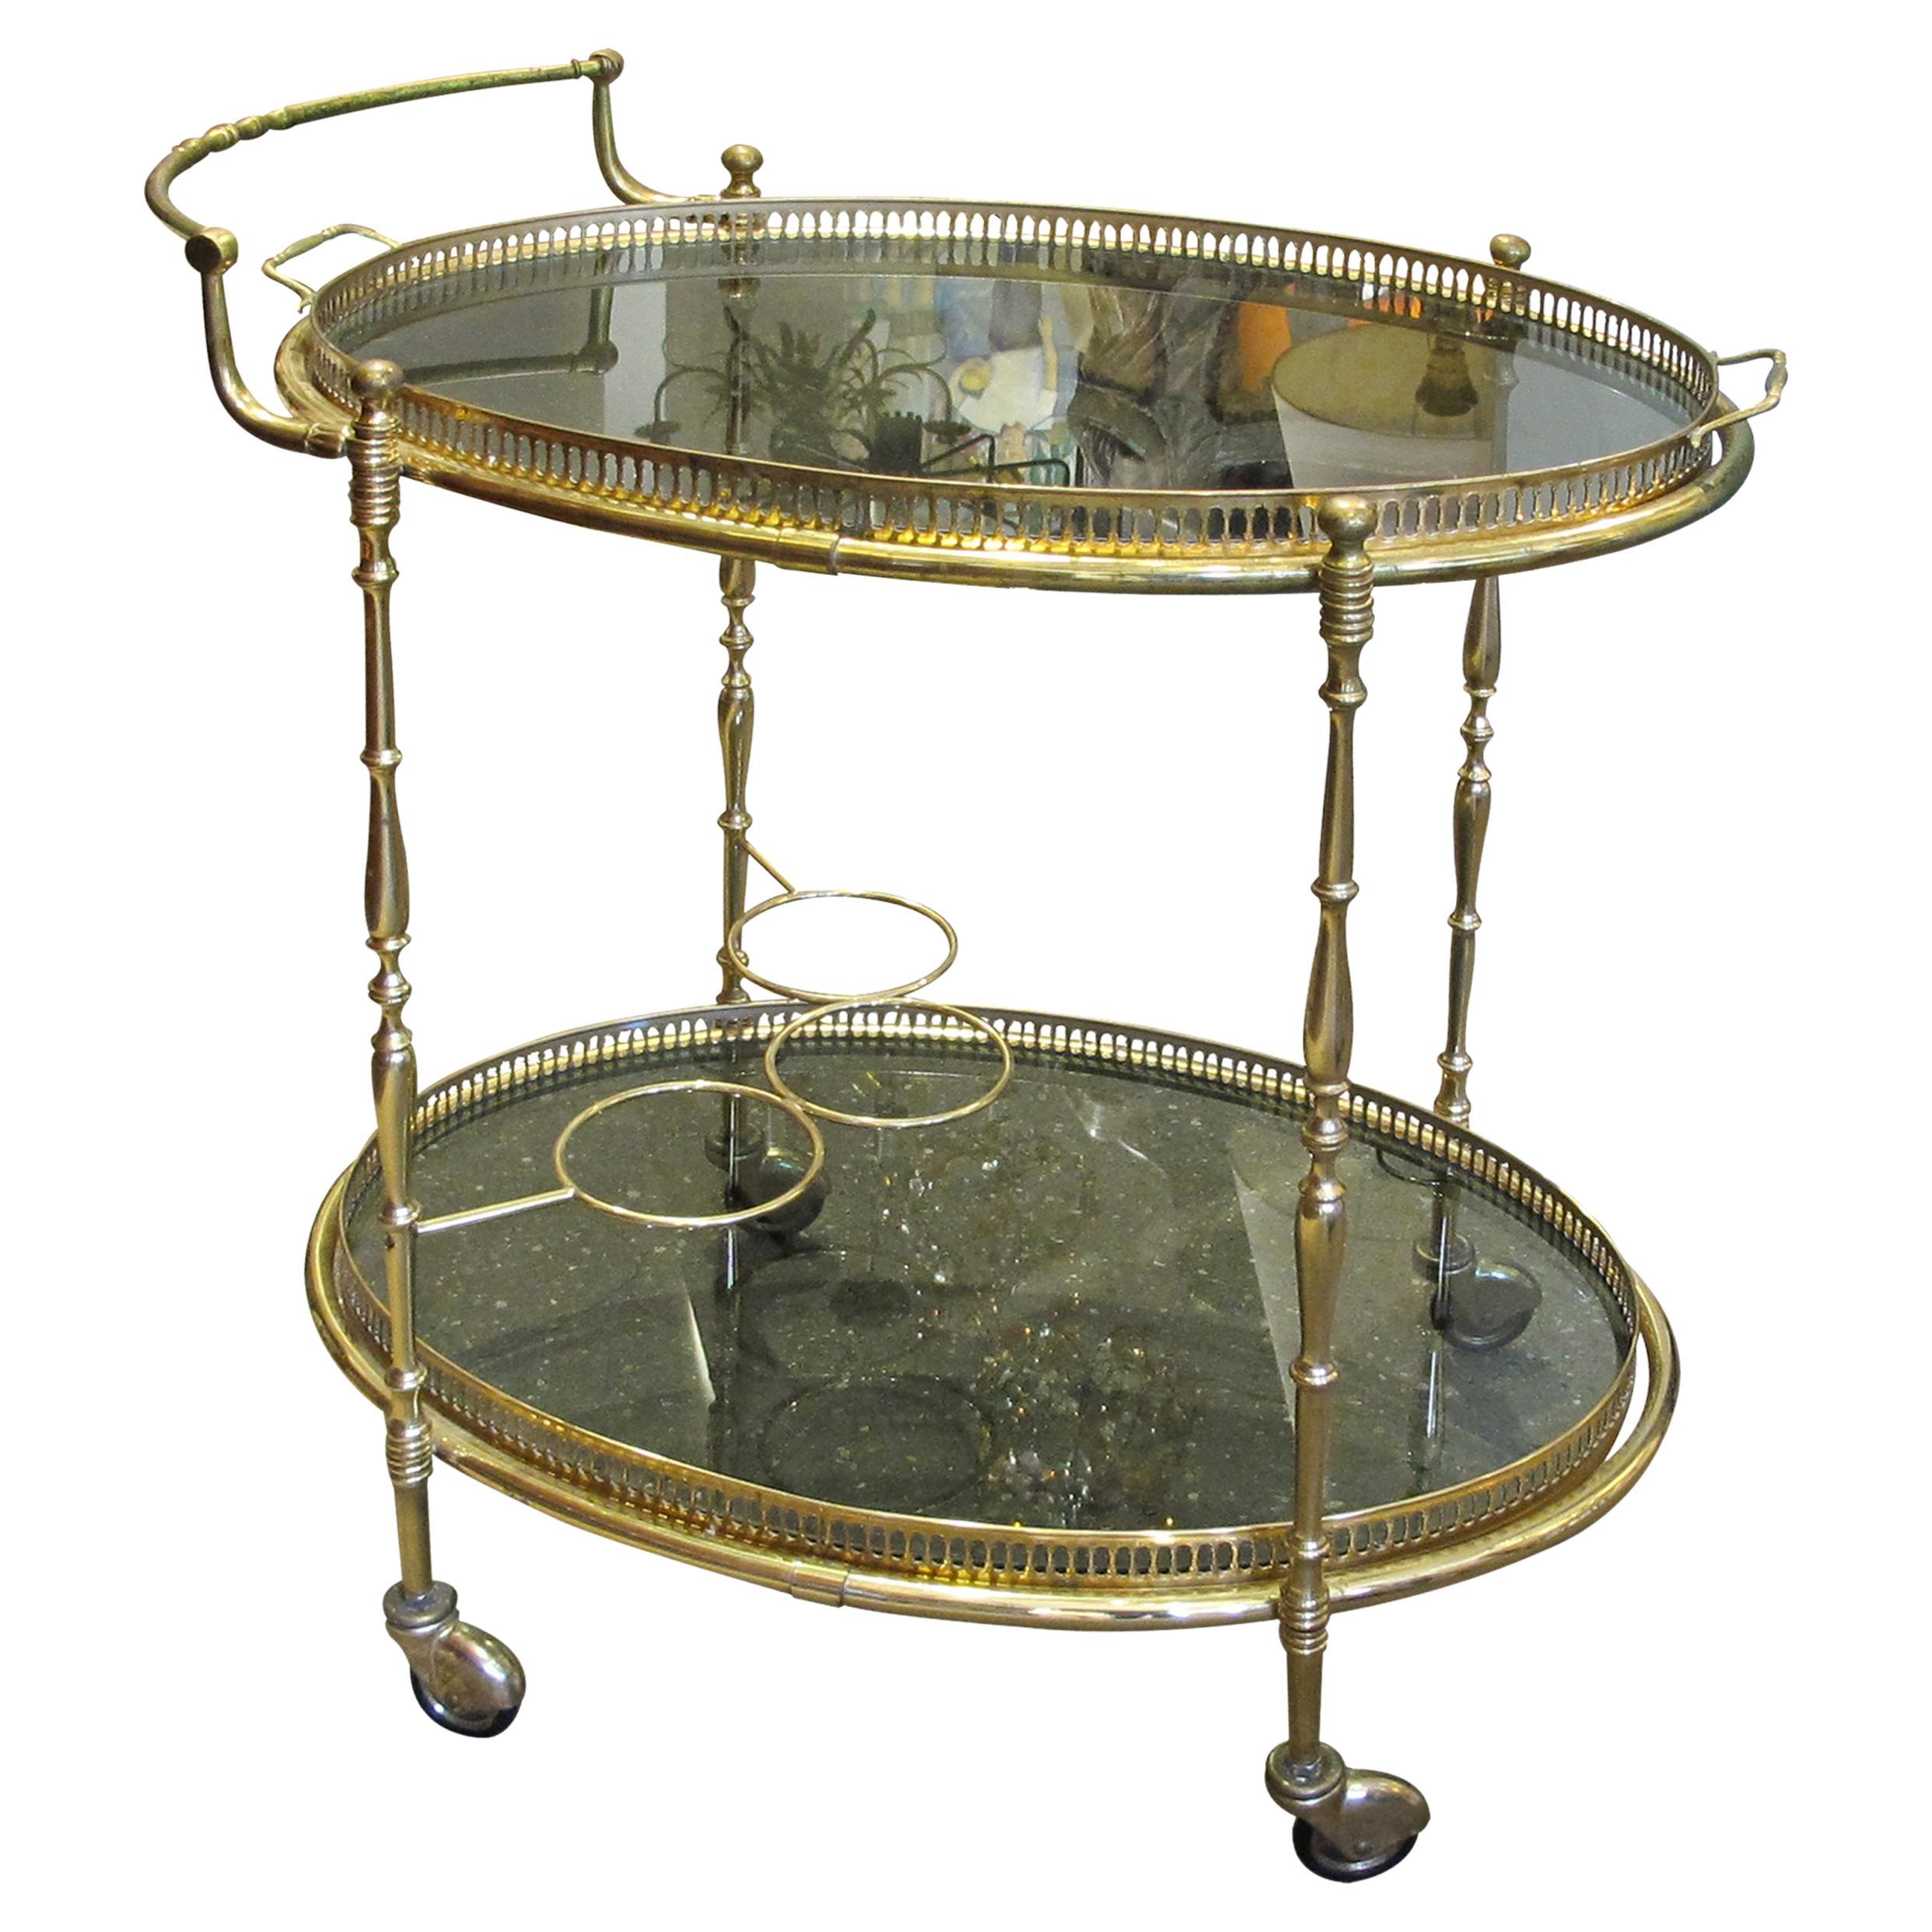 1970s French Brass Oval Serving Bar Cart or Drinks Trolley with Tray on Wheels